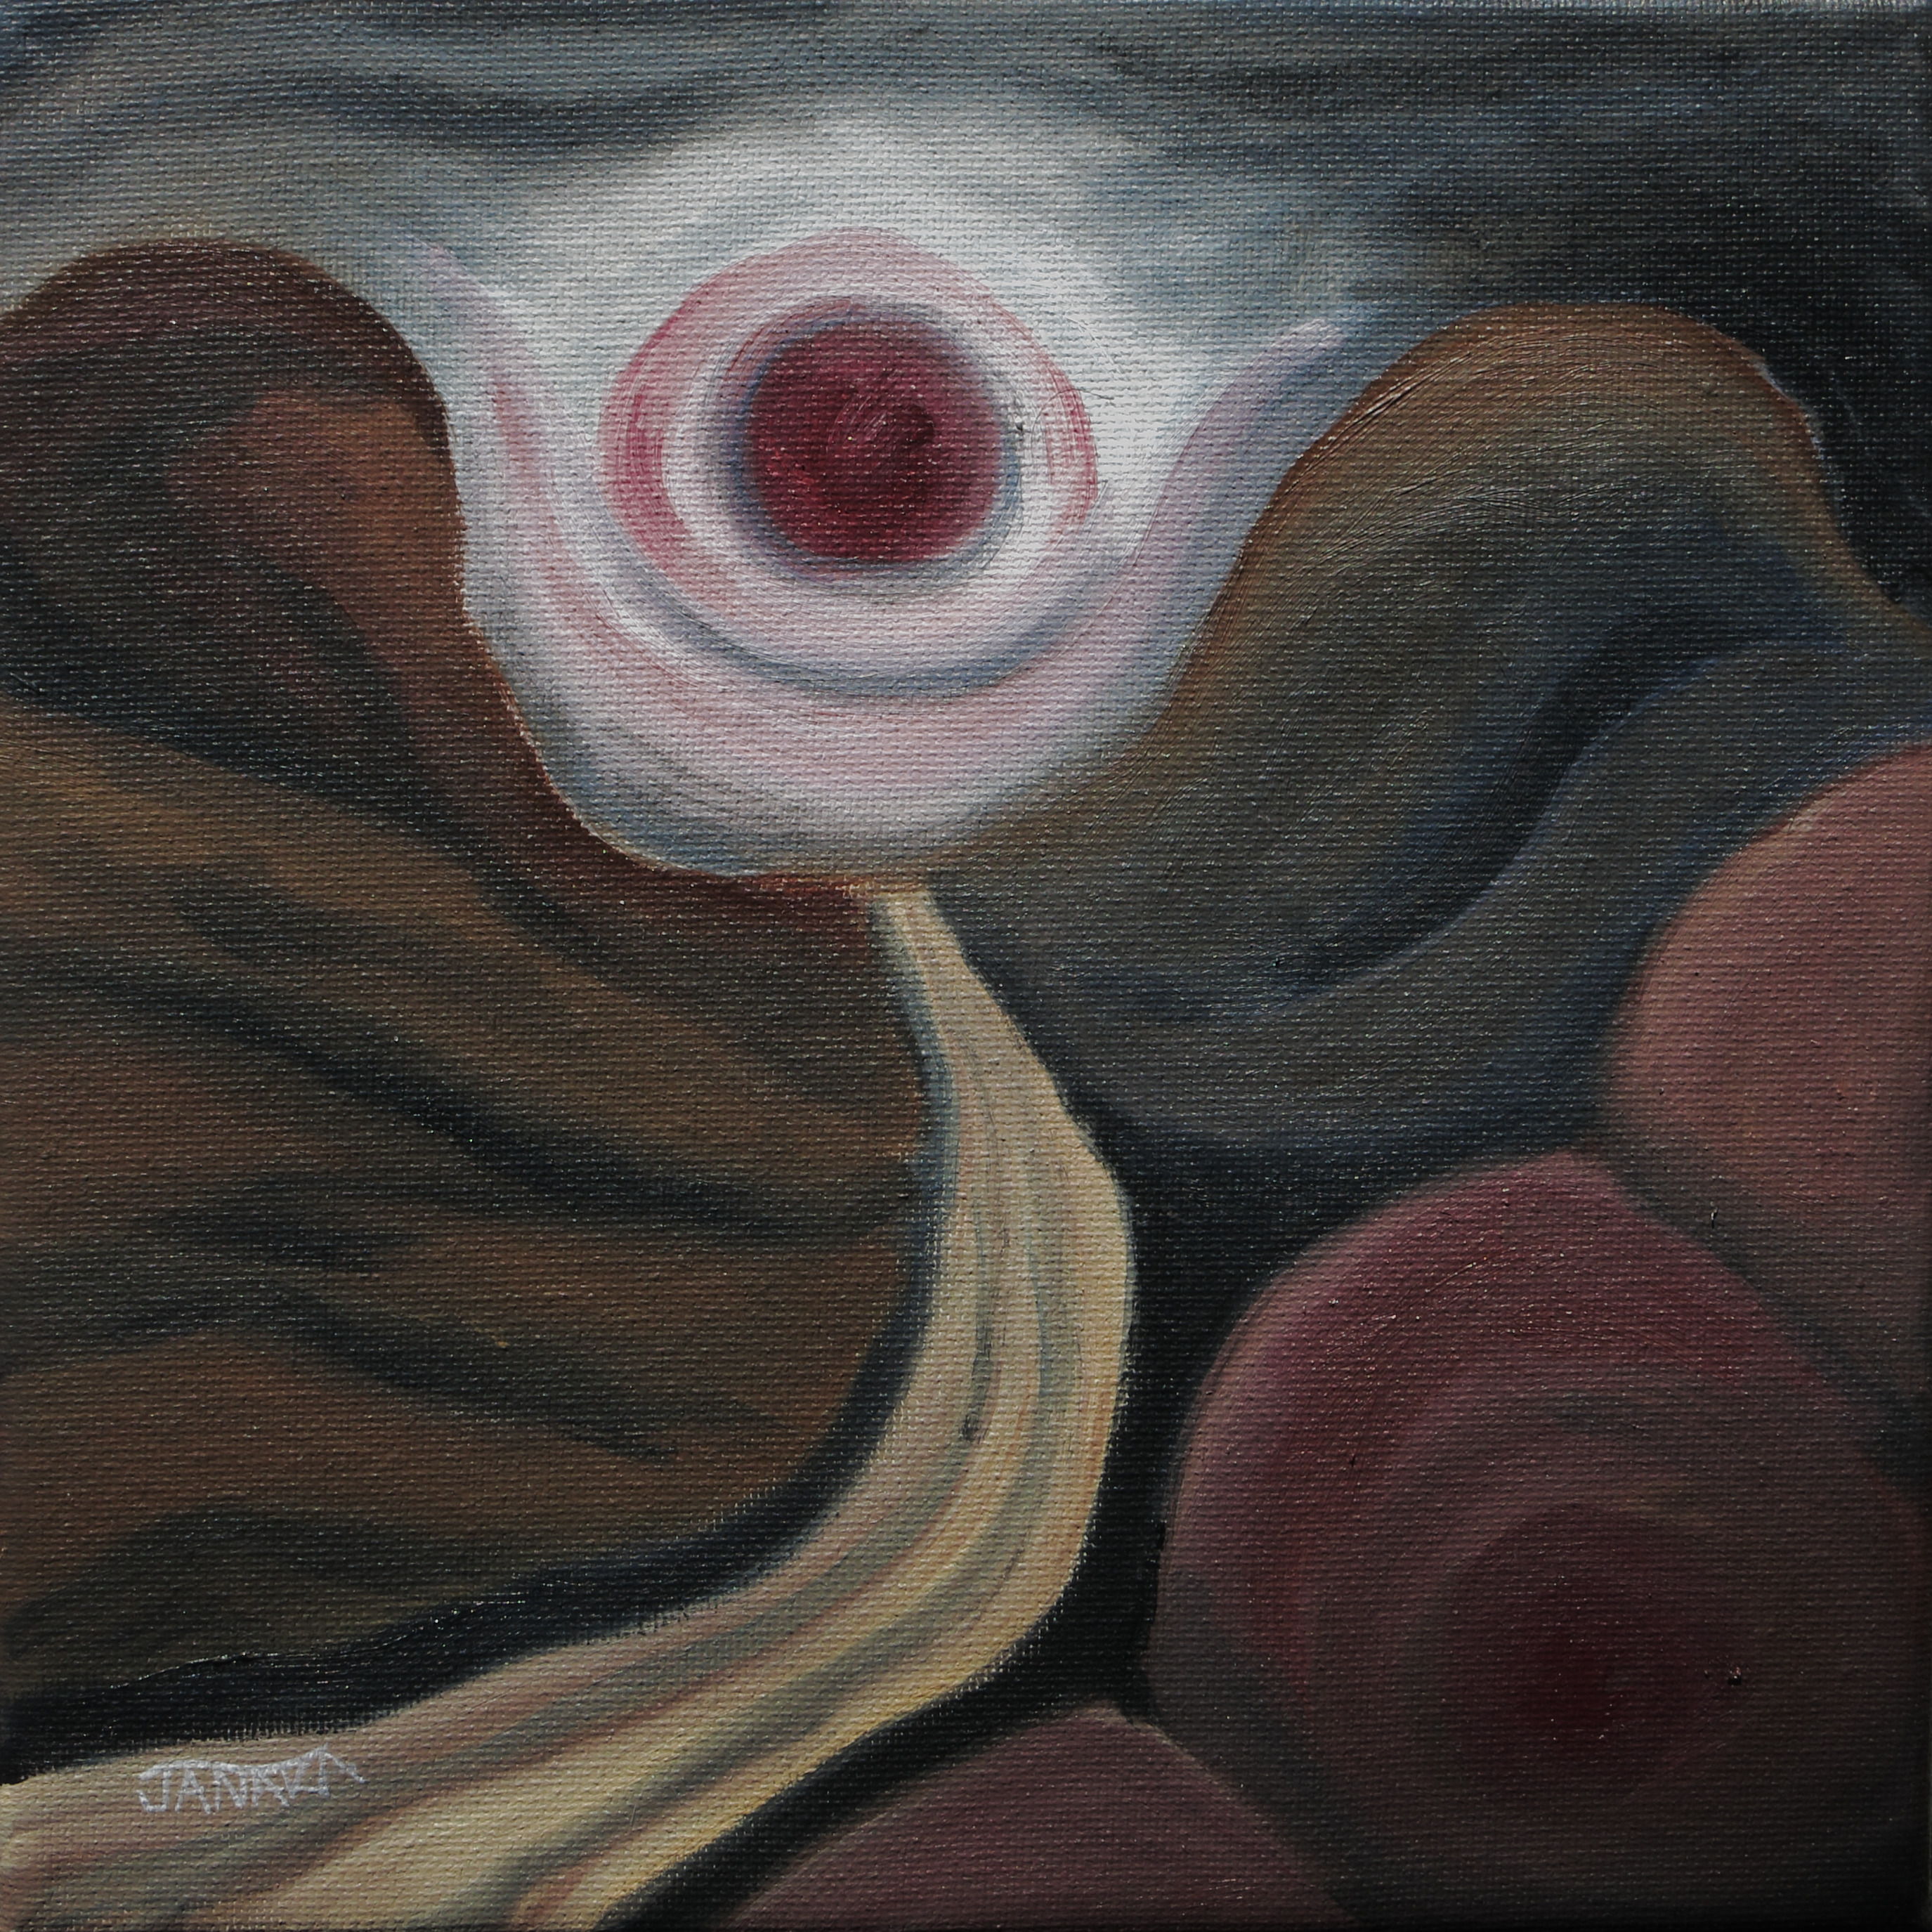 Curving to the sun8x8 d2gtrp